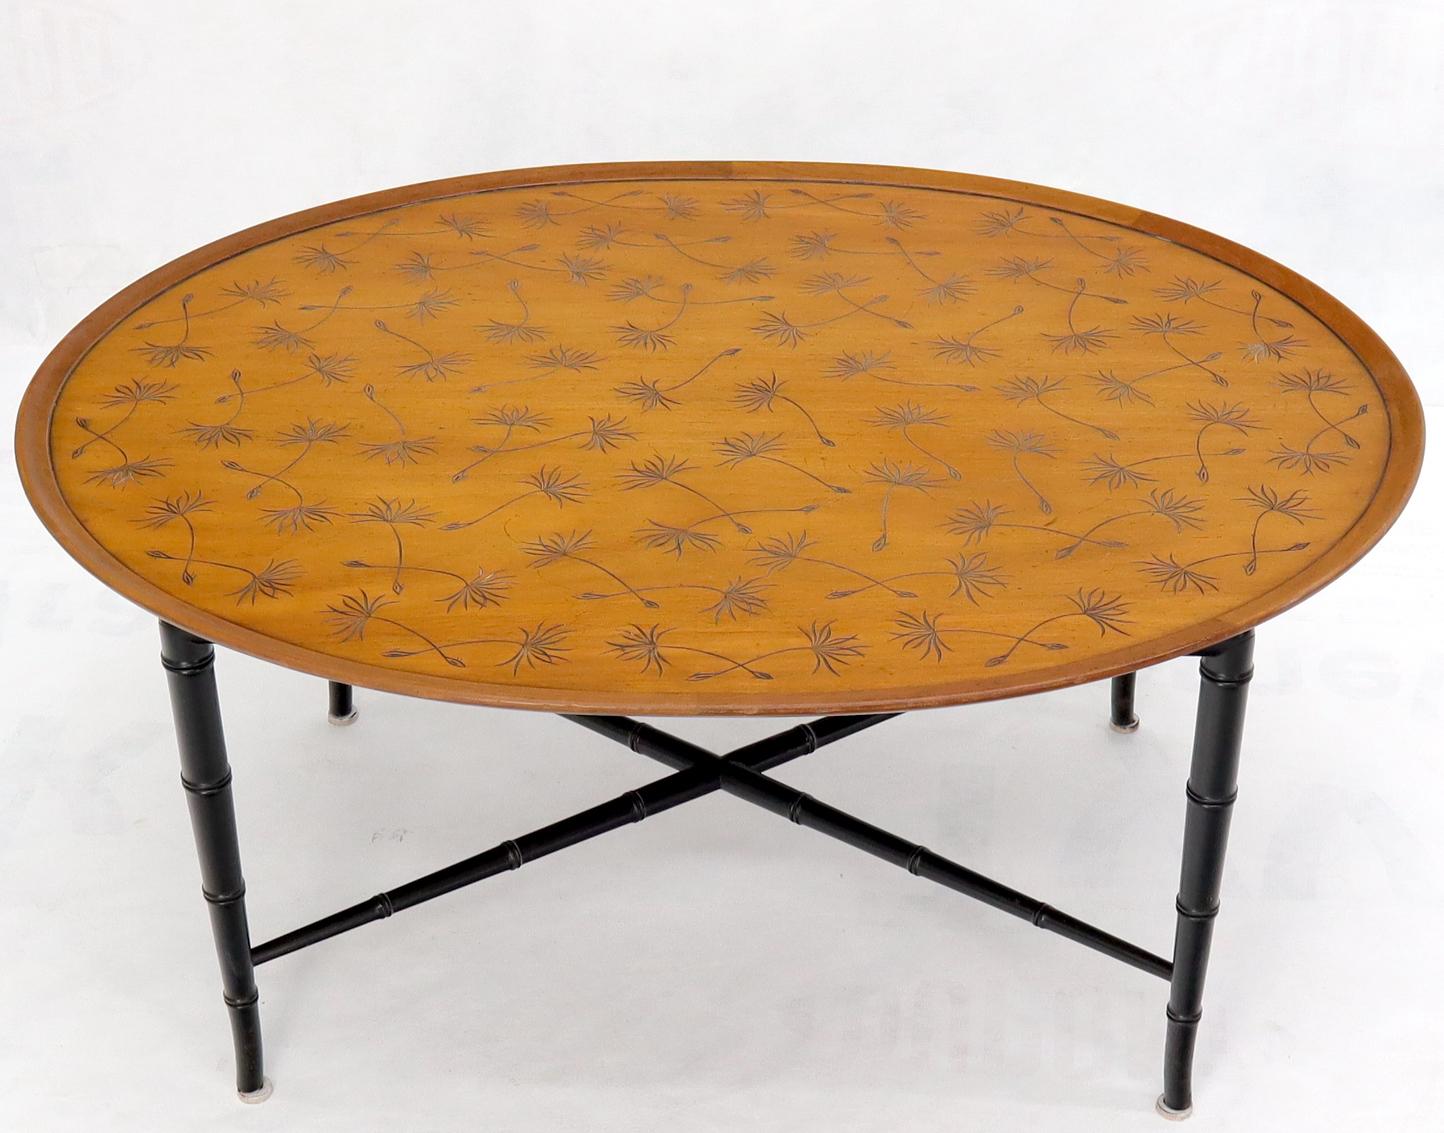 Oval Kittinger Coffee Table Faux Bamboo Tapered Legs Incised Leafs Design on Top For Sale 1